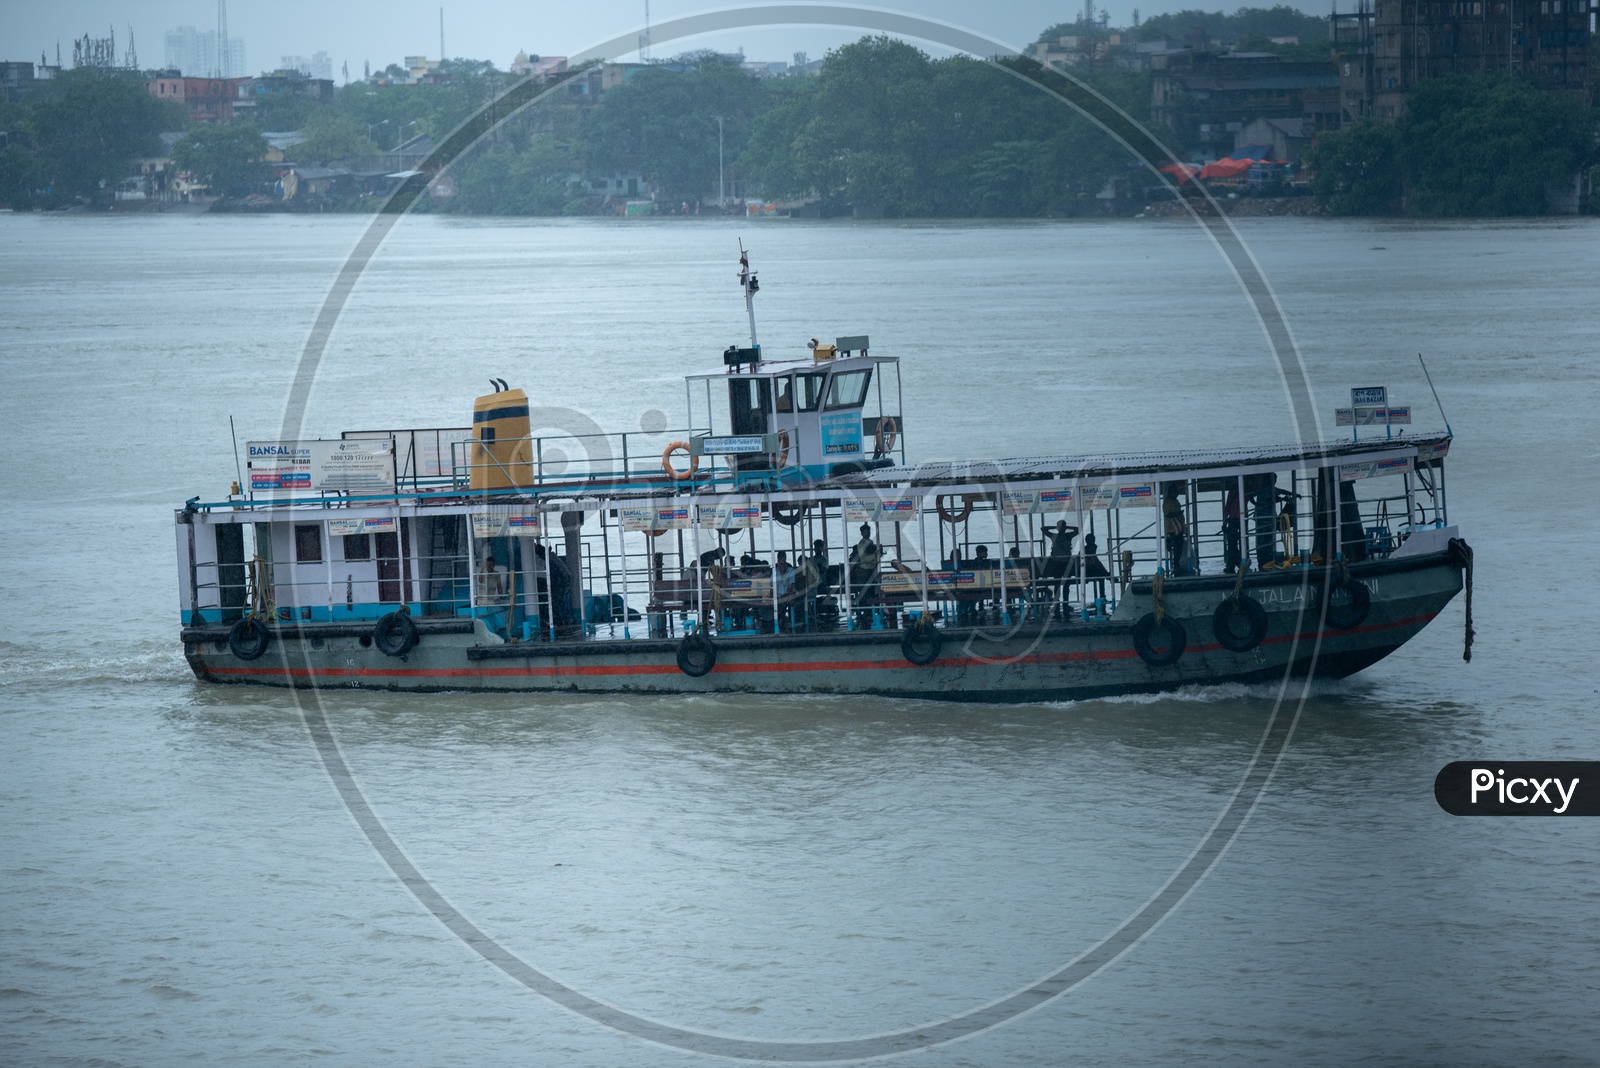 jetty Or Ferry  or  Steamer Boats In  Hooghly River  For Commuting  Or Transportation